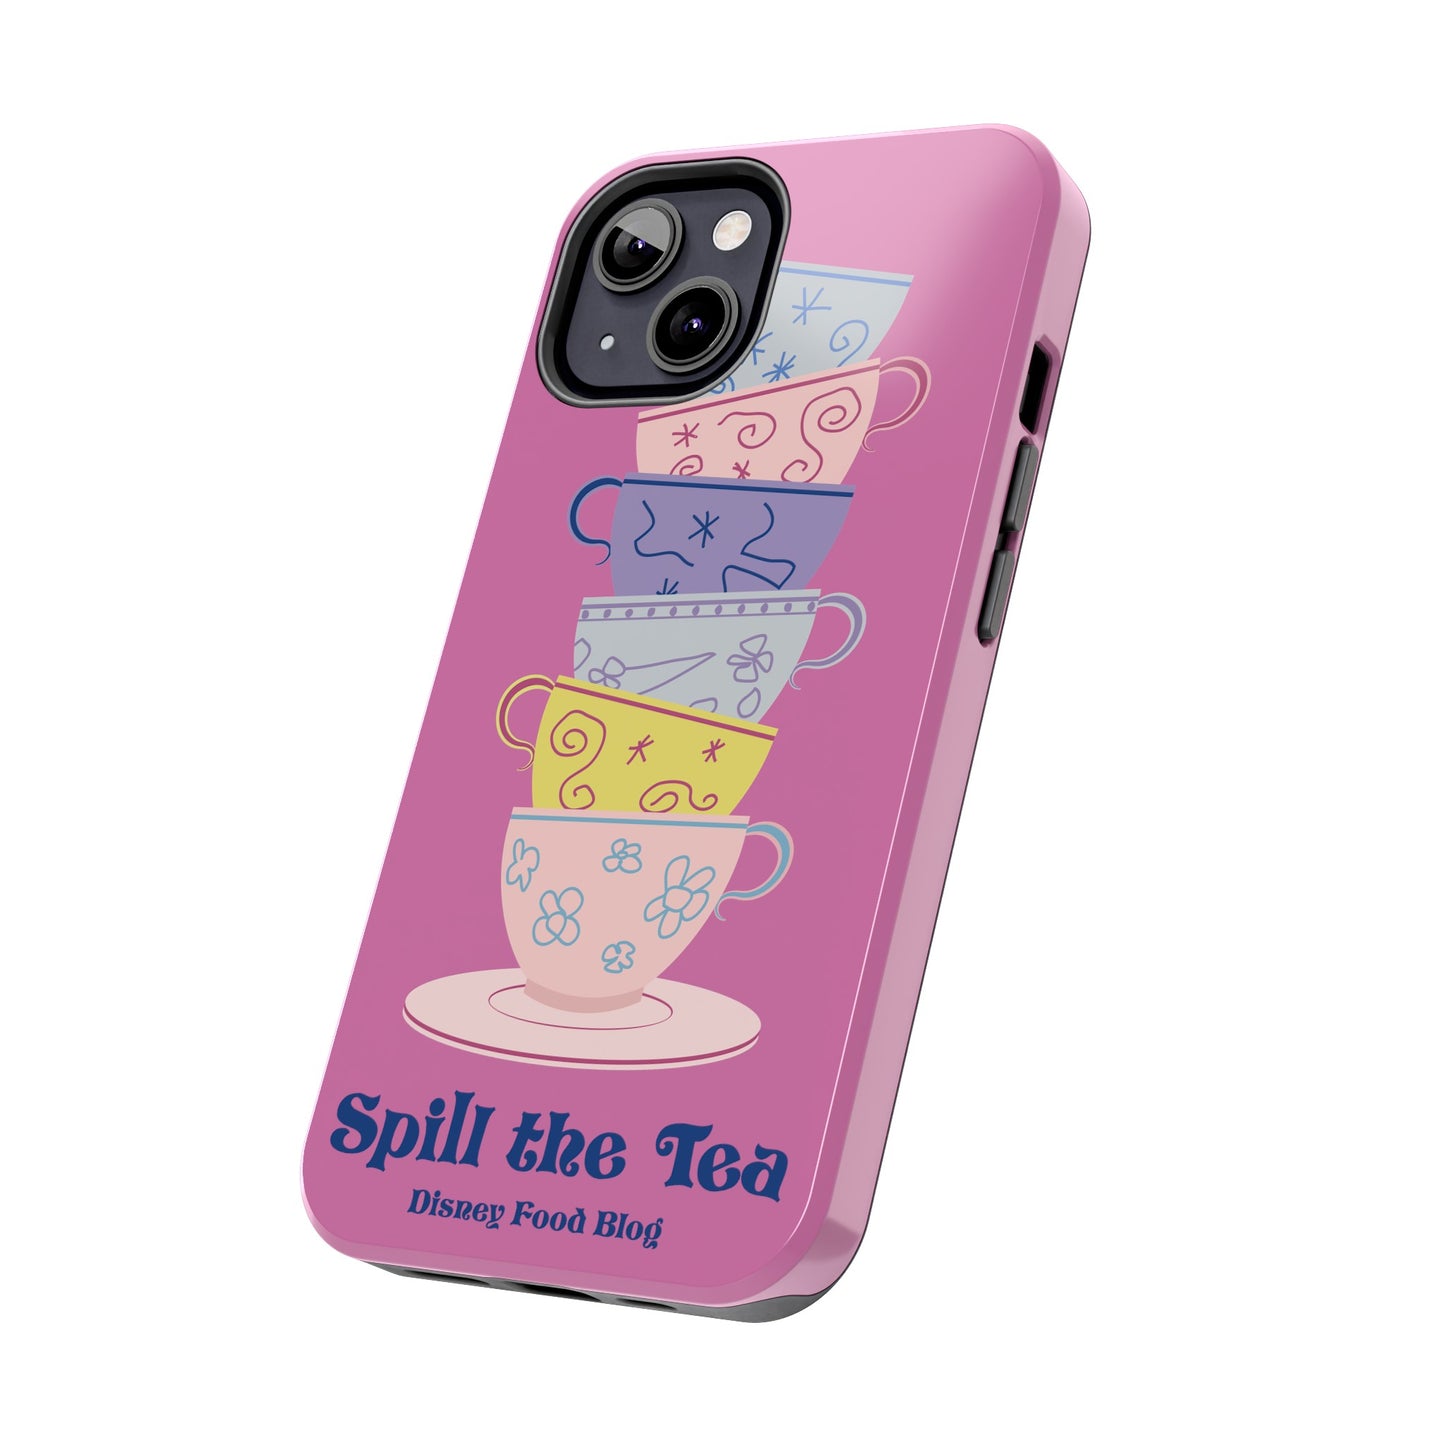 Spill the Mad Tea Party Apple Phone Case